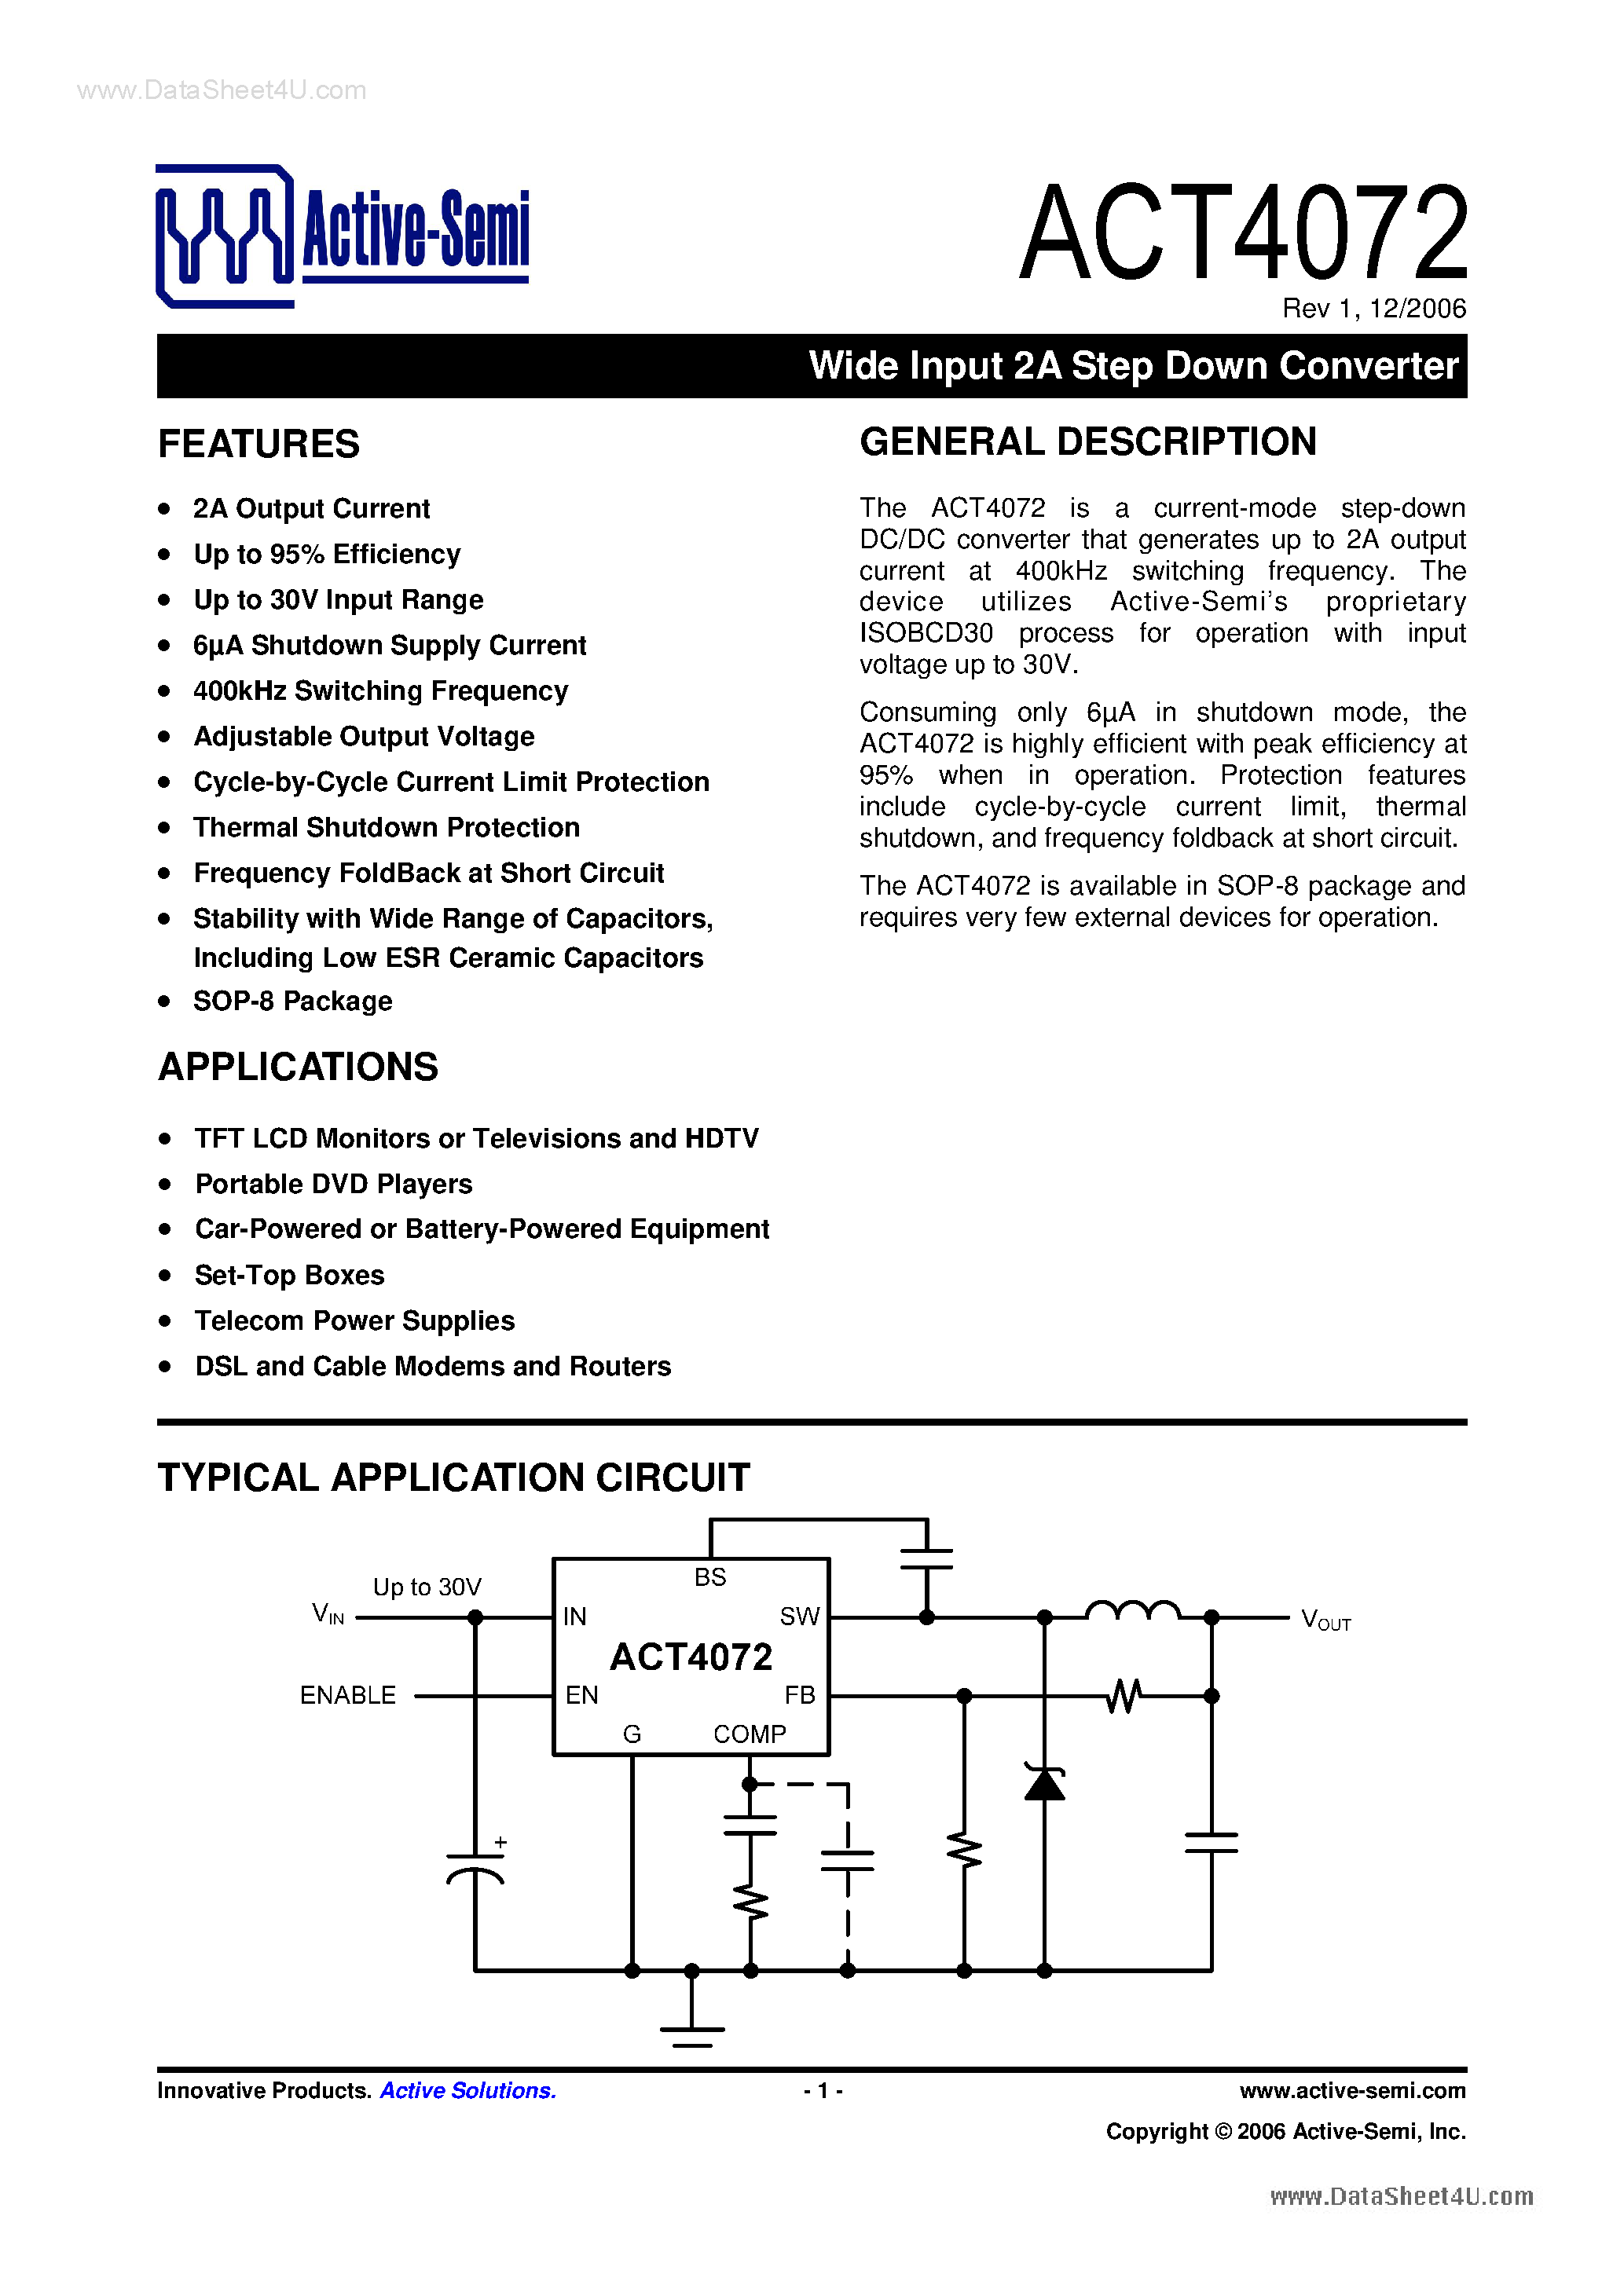 Datasheet ACT4072 - Wide Input 2A Step Down Converter page 1